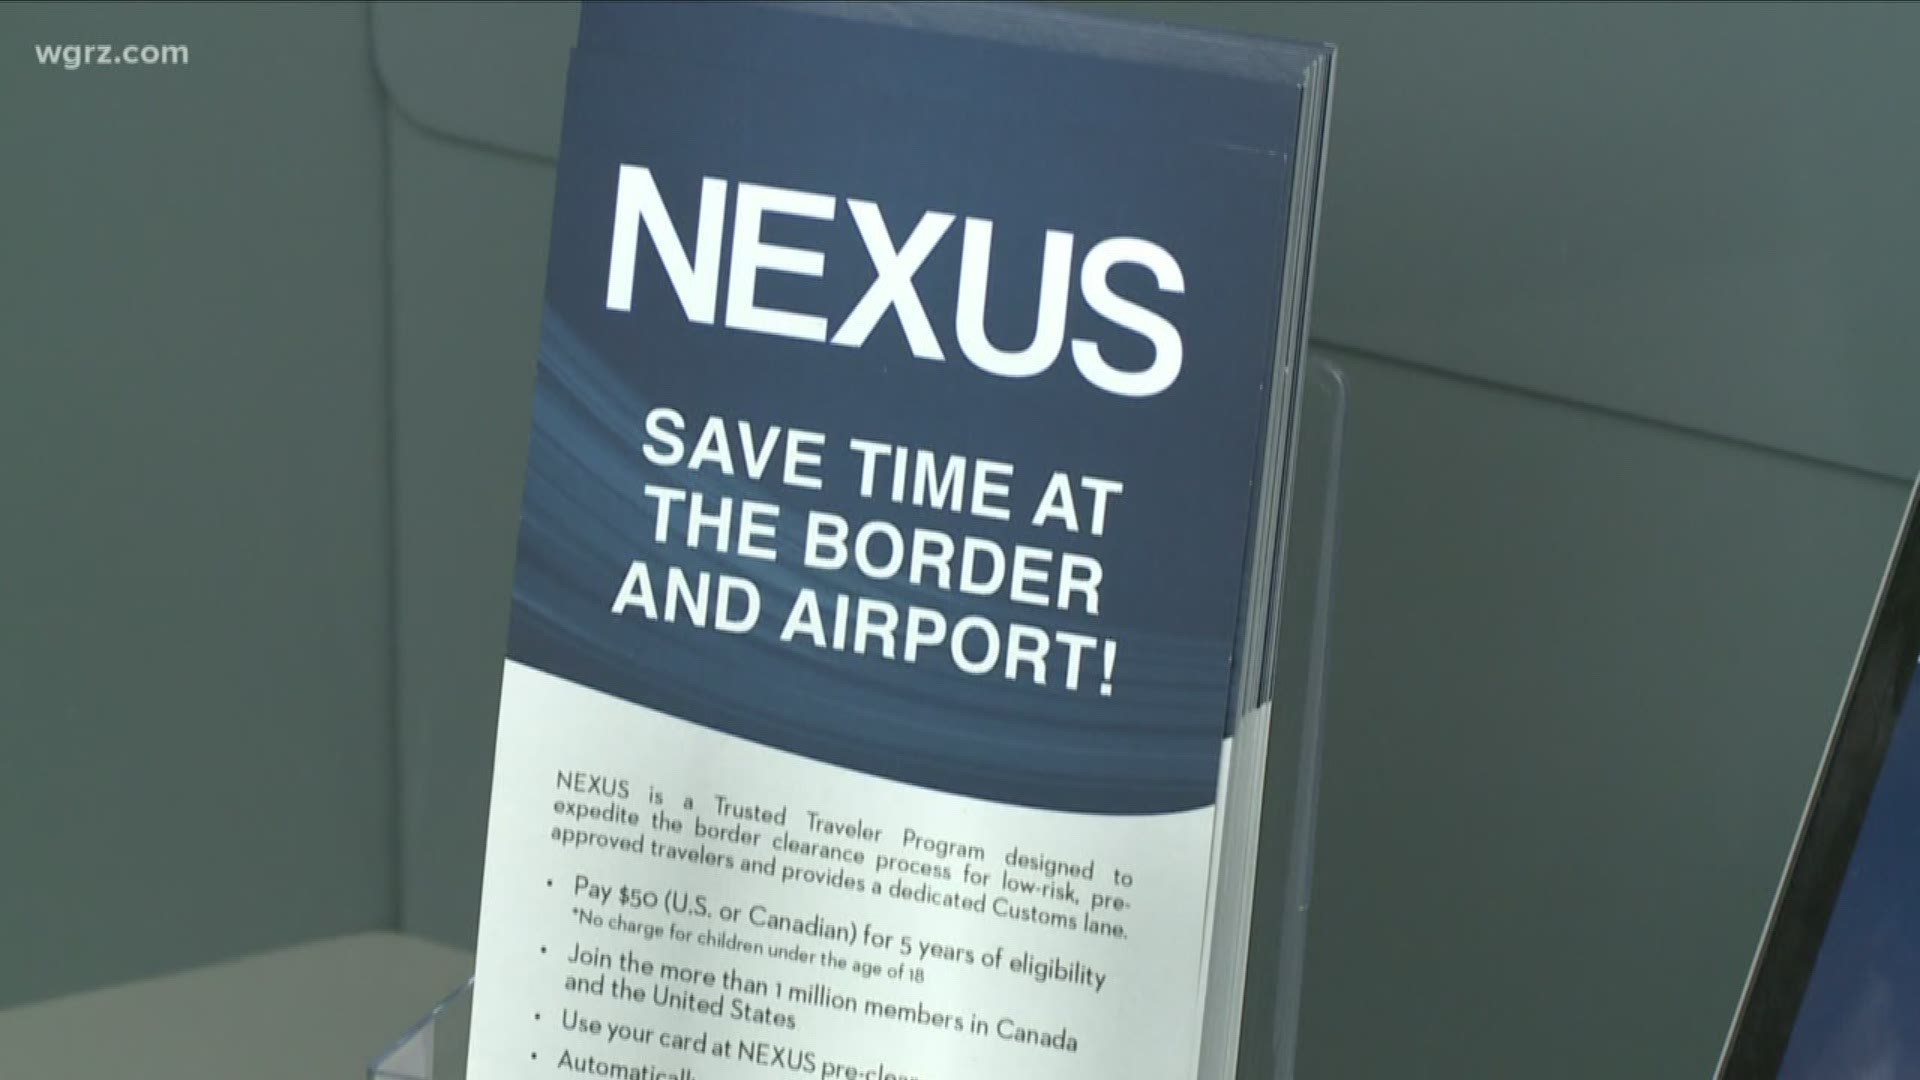 everyone who seeks to apply for quicker access across the border through nexus in a lurch